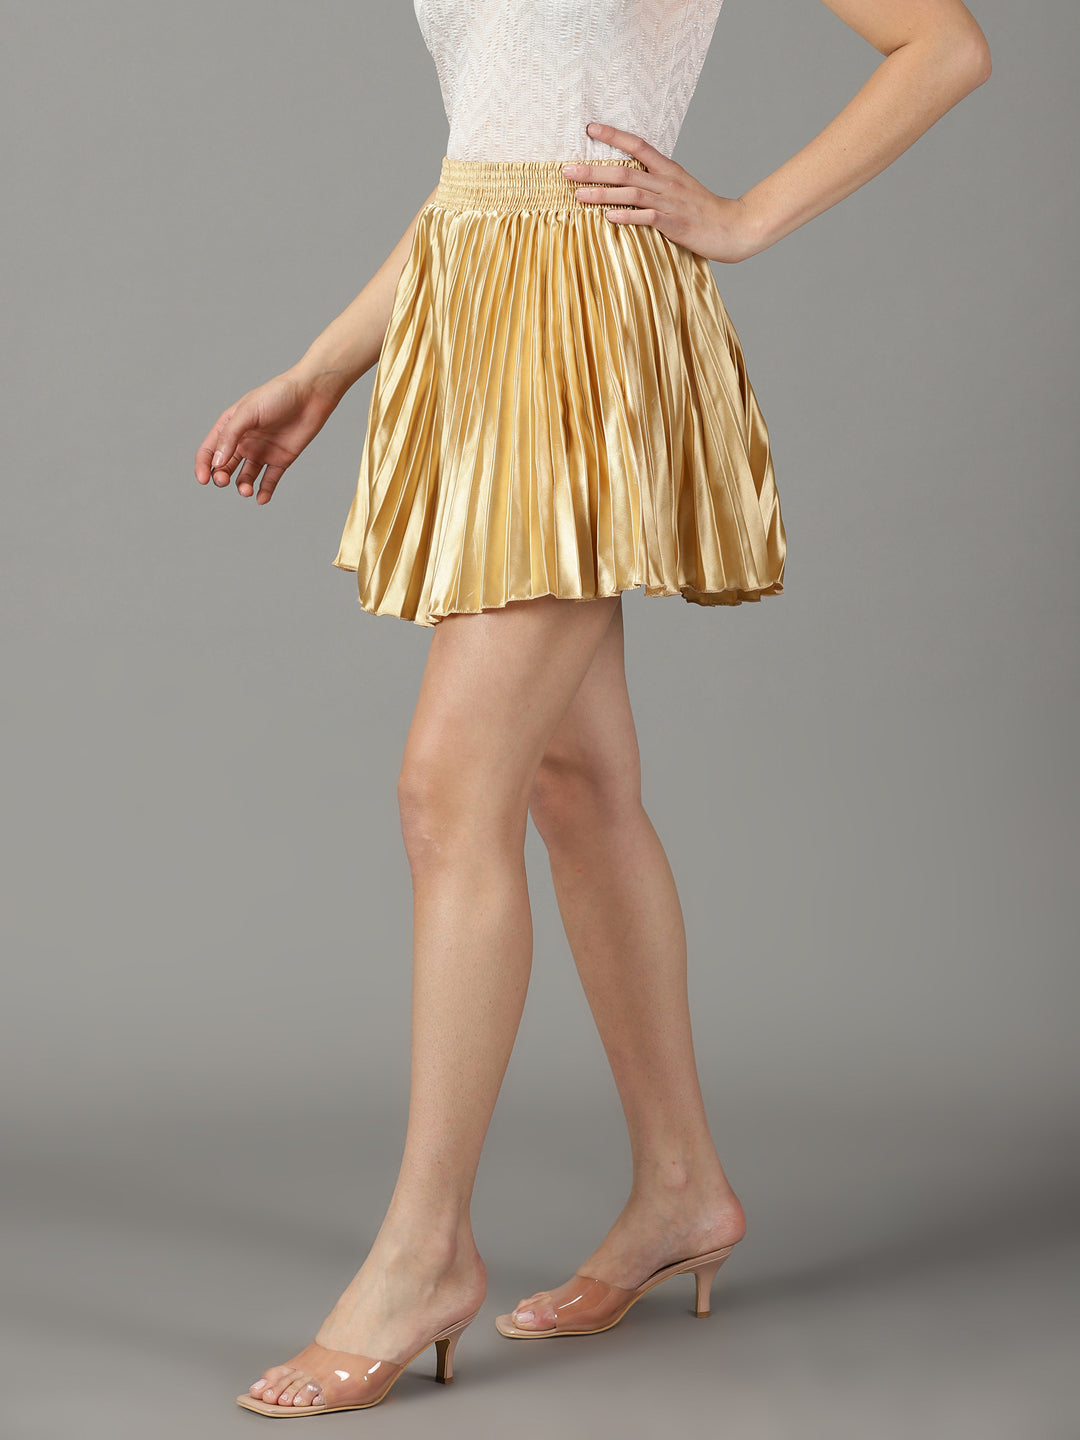 Women's Gold Solid Flared Skirt